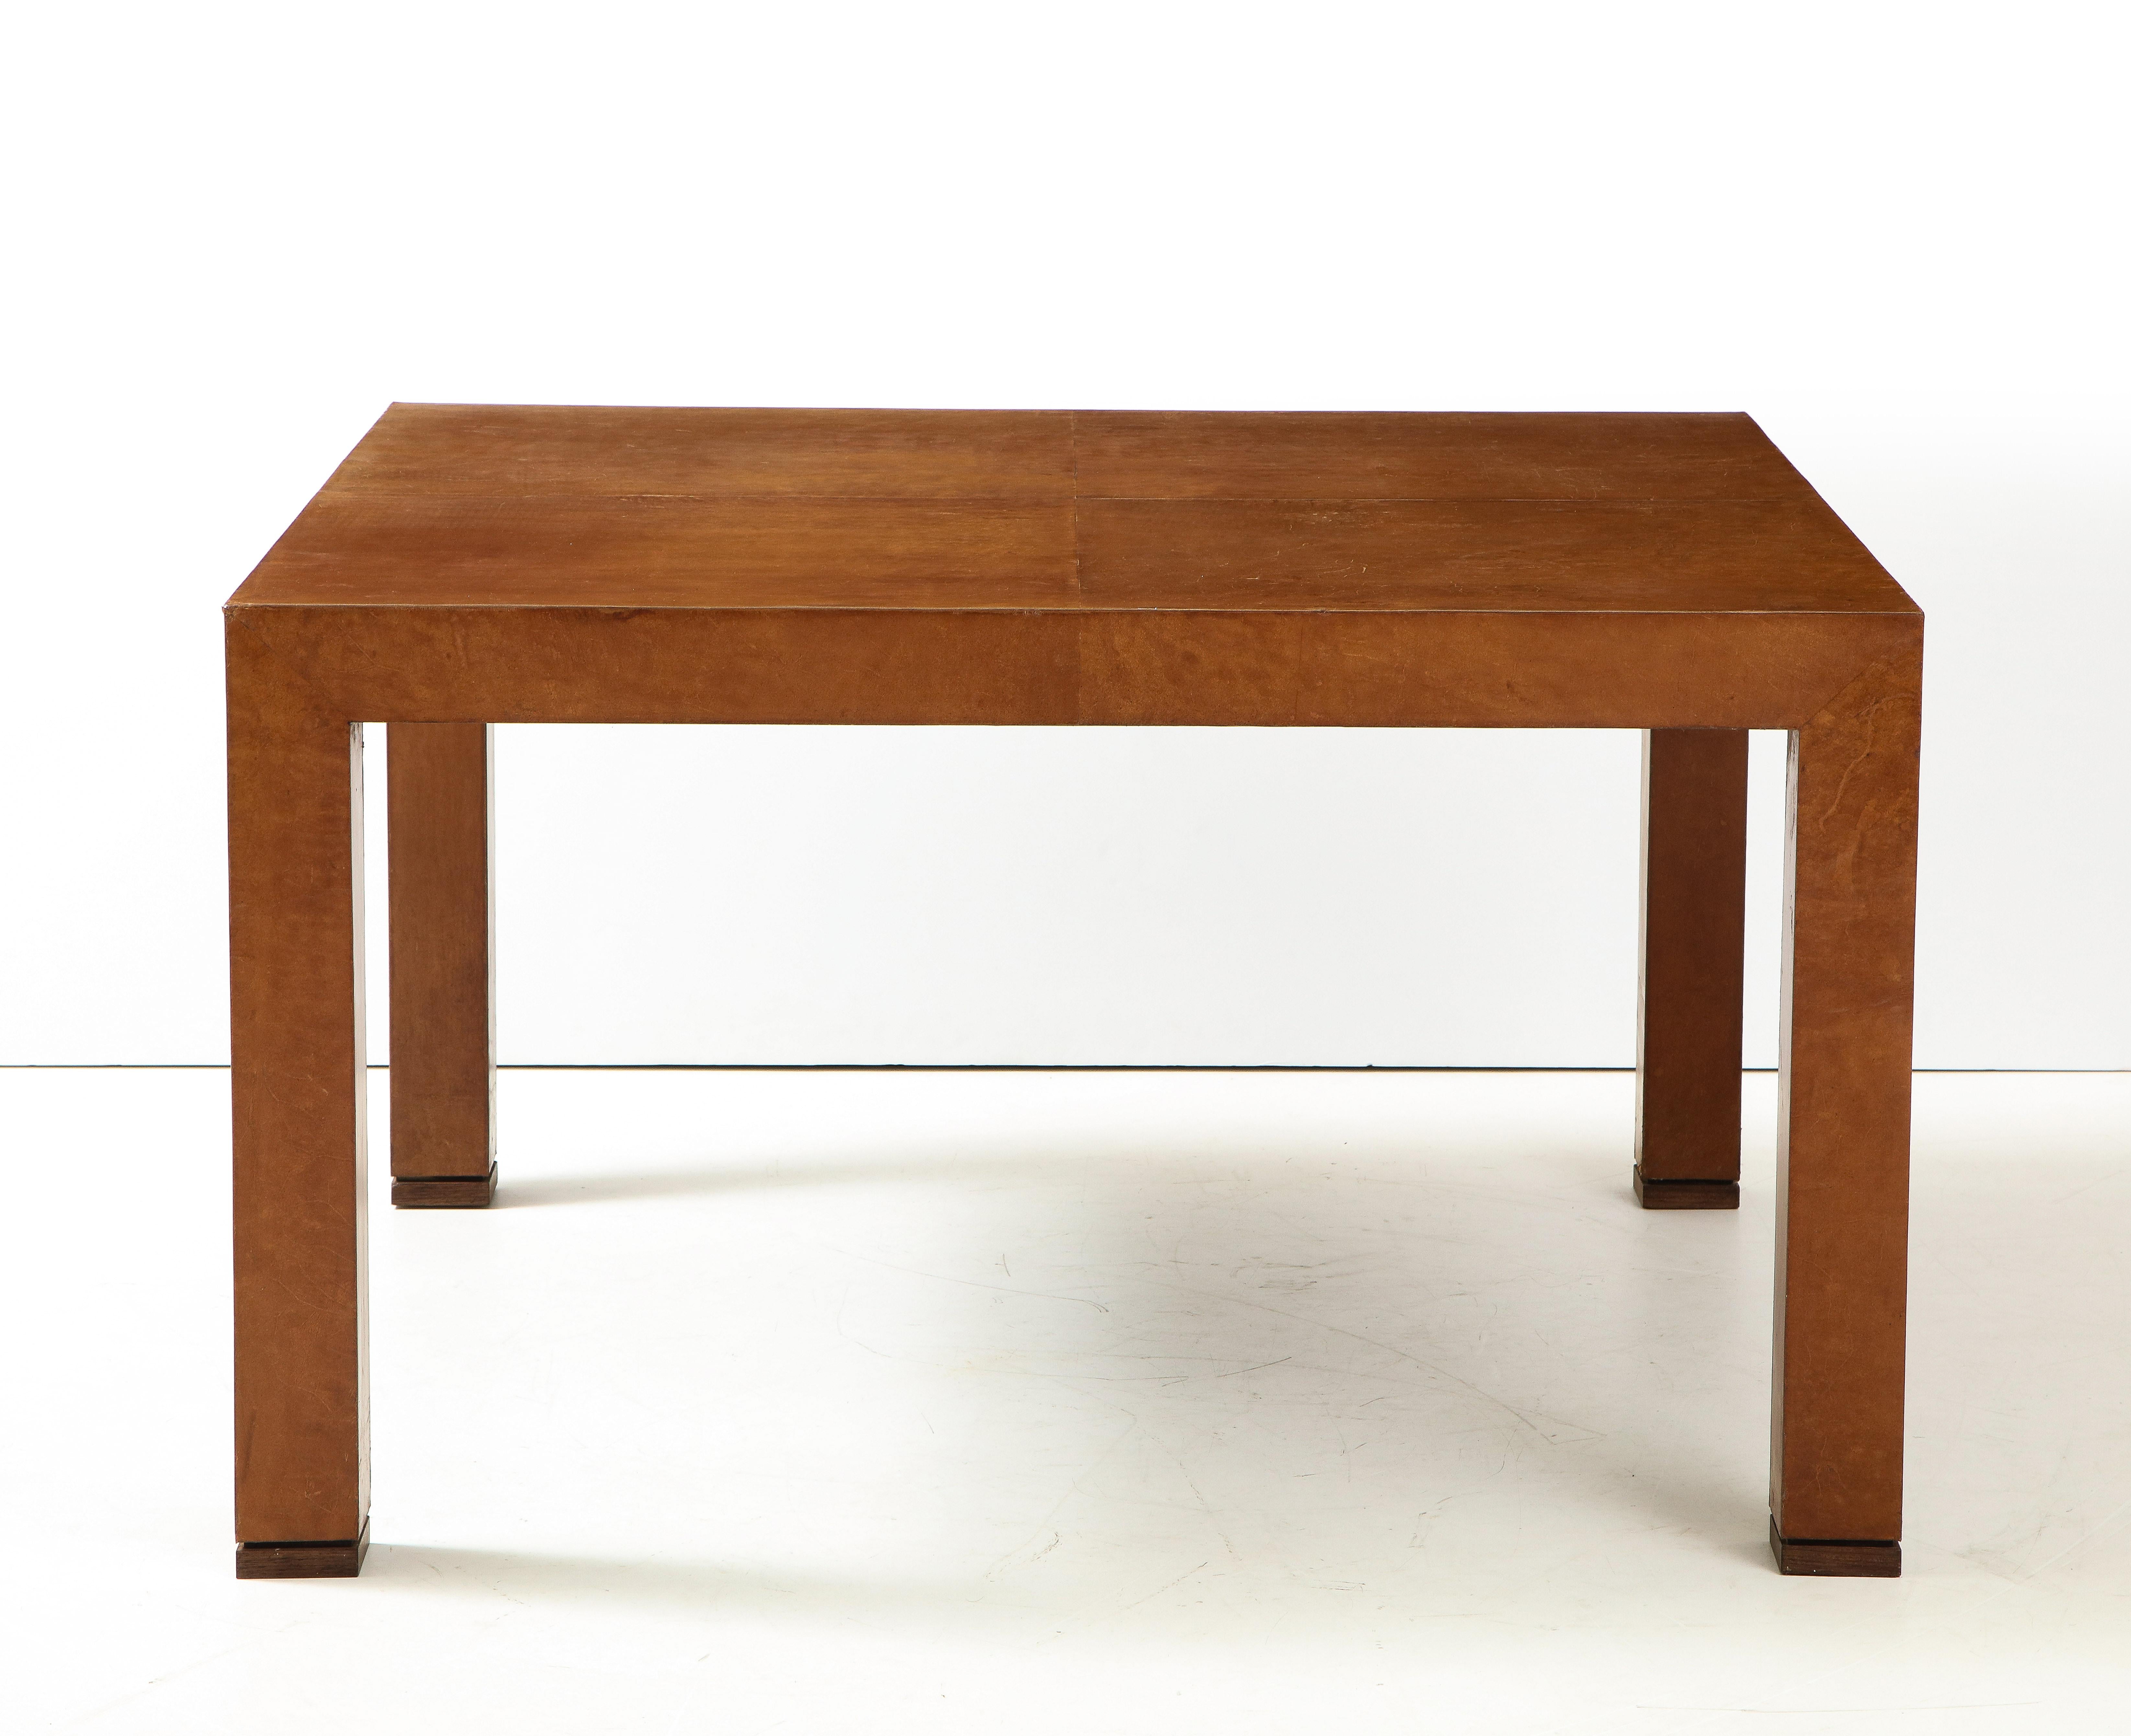 Havana leather dining table, France, c. 1960-70
Measures: H 29.5 D: 52 W: 52 in.
  